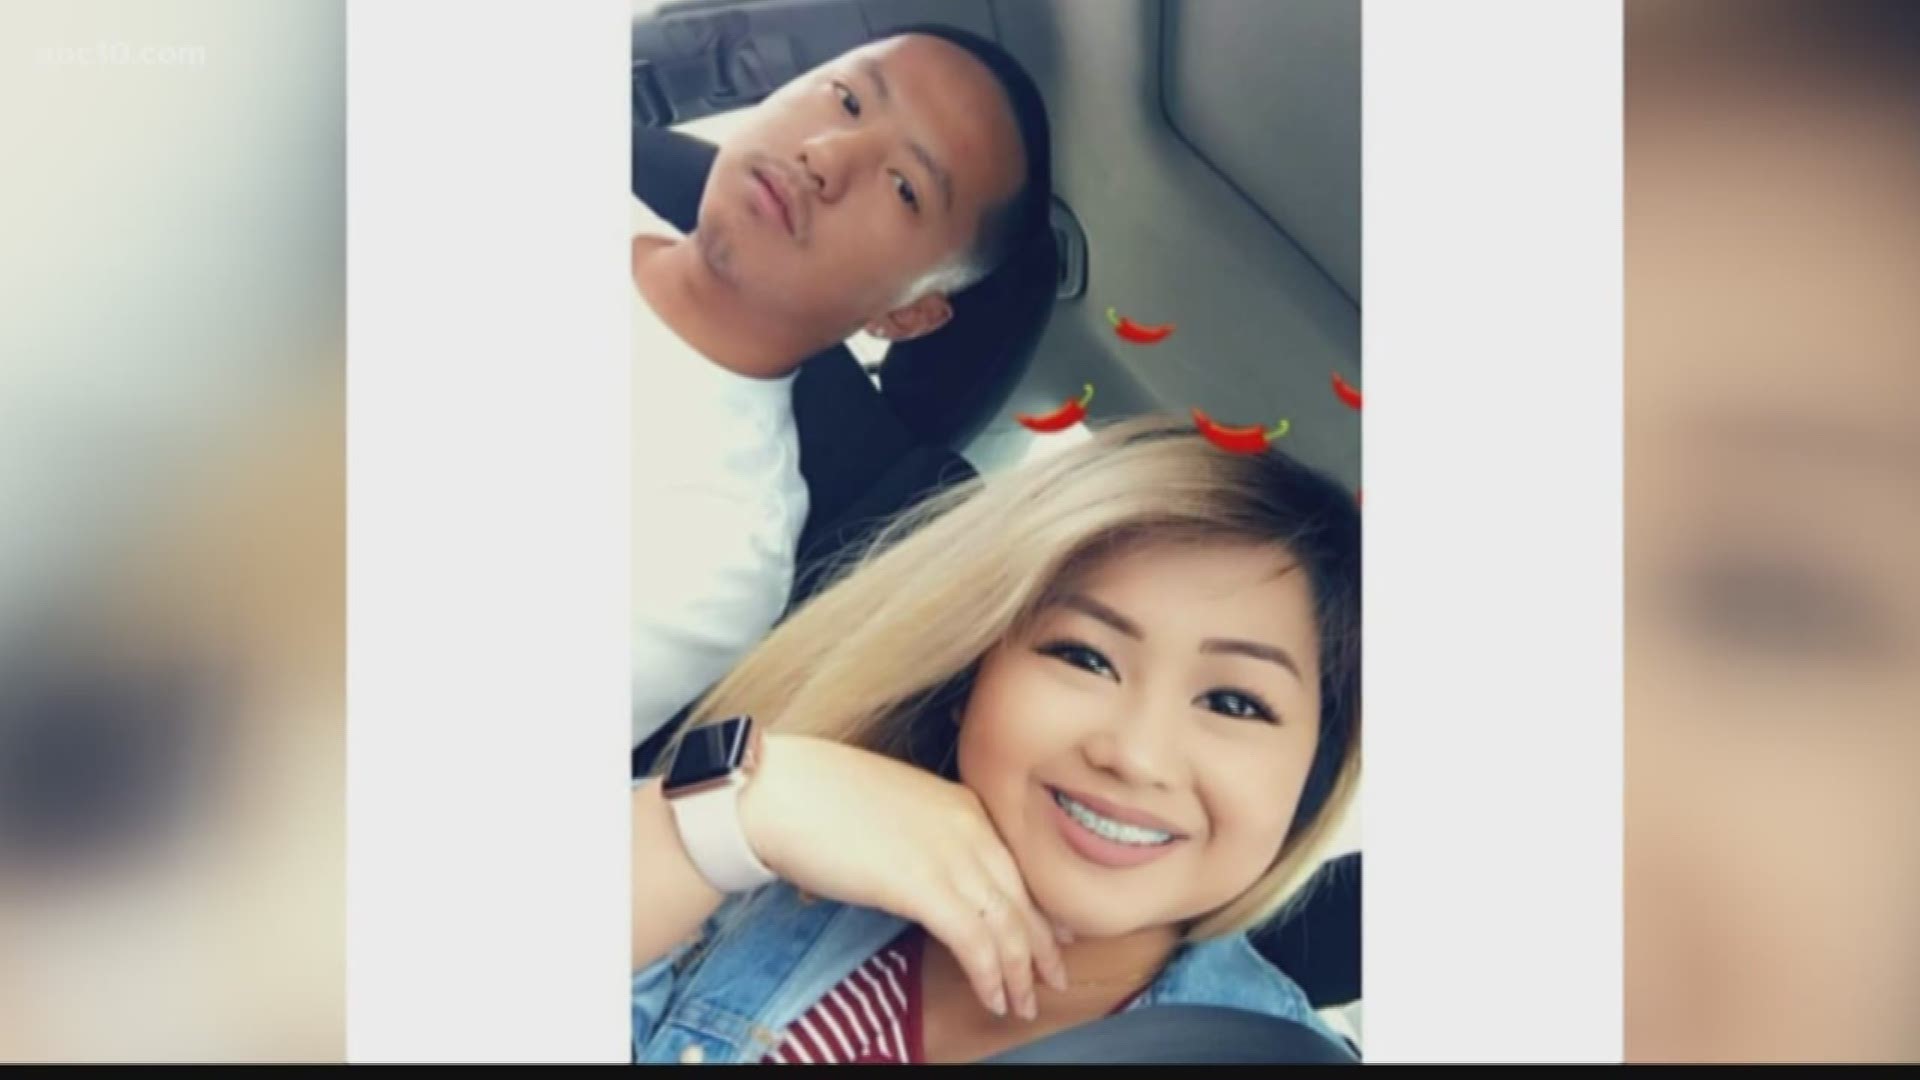 Cheng Lor's brother Joe, sister-in-law Gina Xiong and 5-year-old niece Kayleen, were shot and killed inside their 11th Street apartment on Mother's Day. (May 17, 2018)